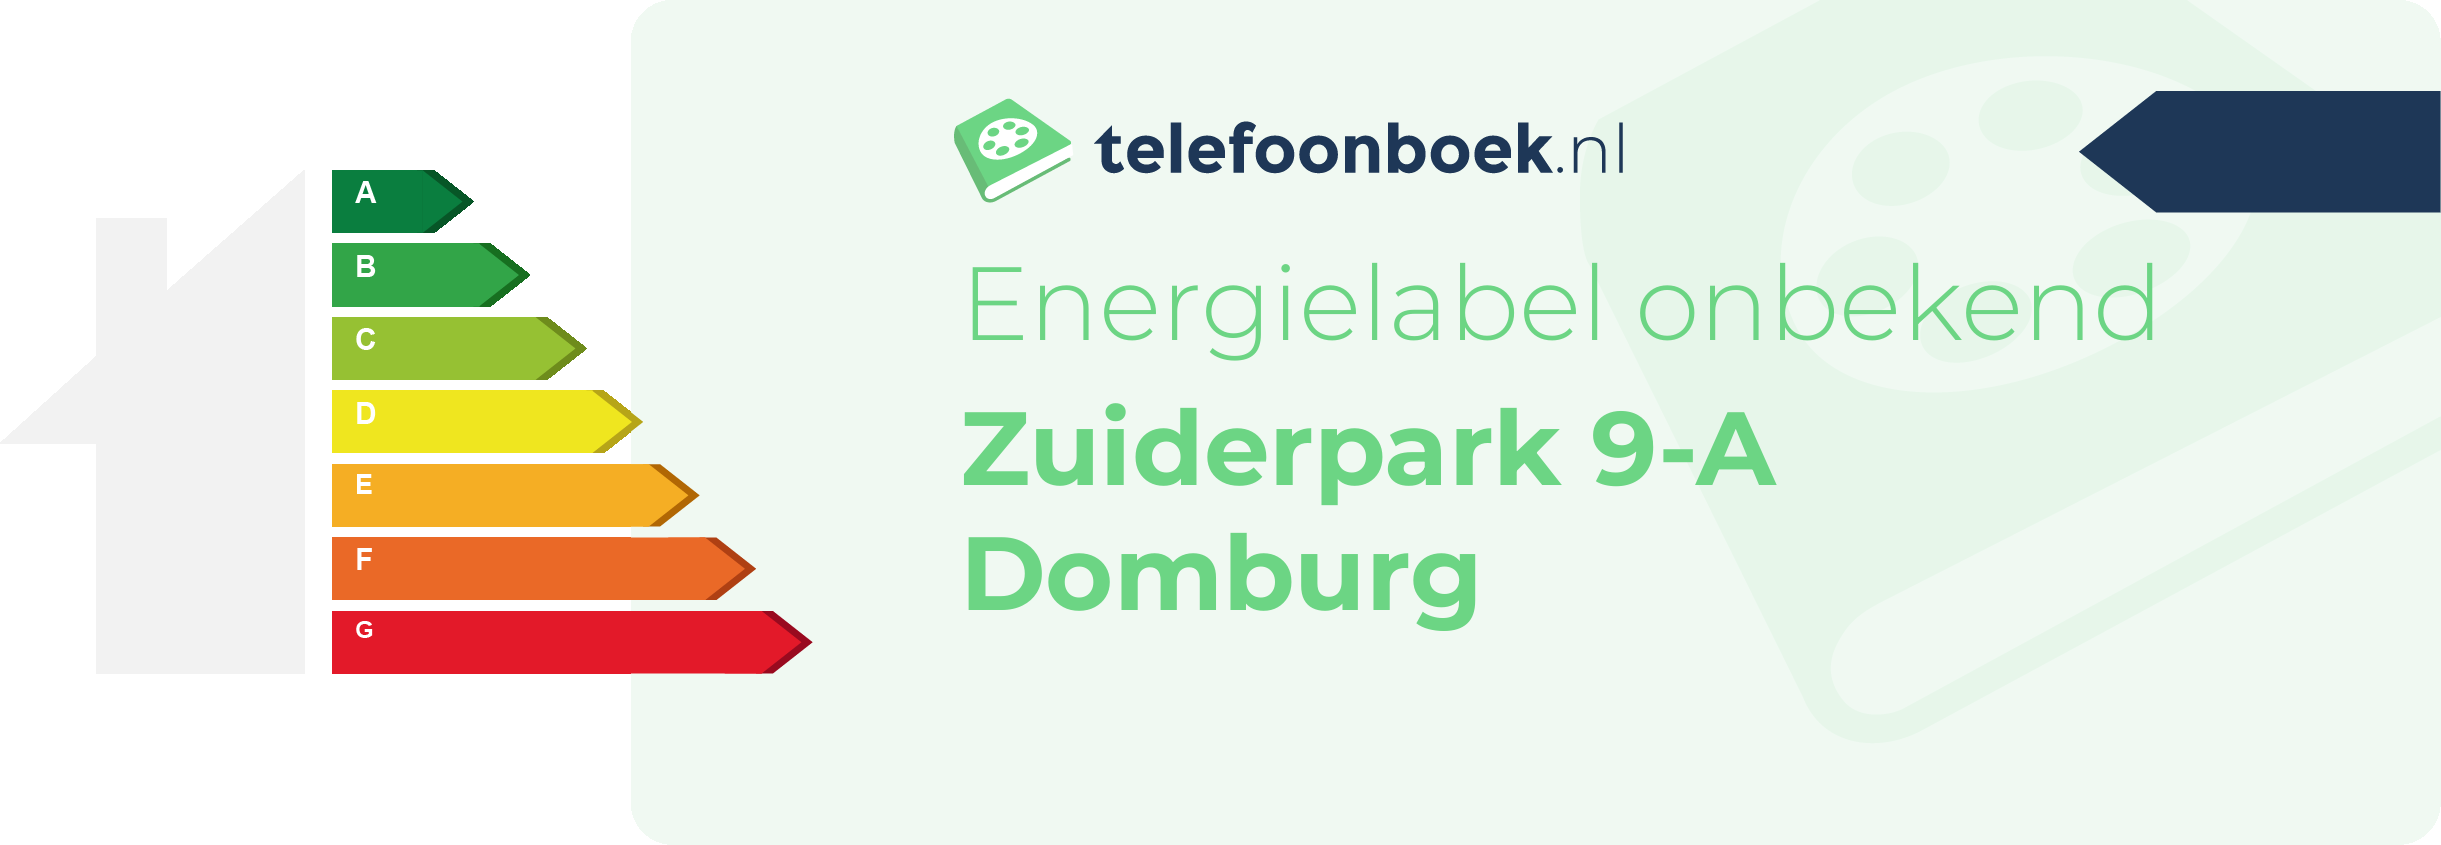 Energielabel Zuiderpark 9-A Domburg